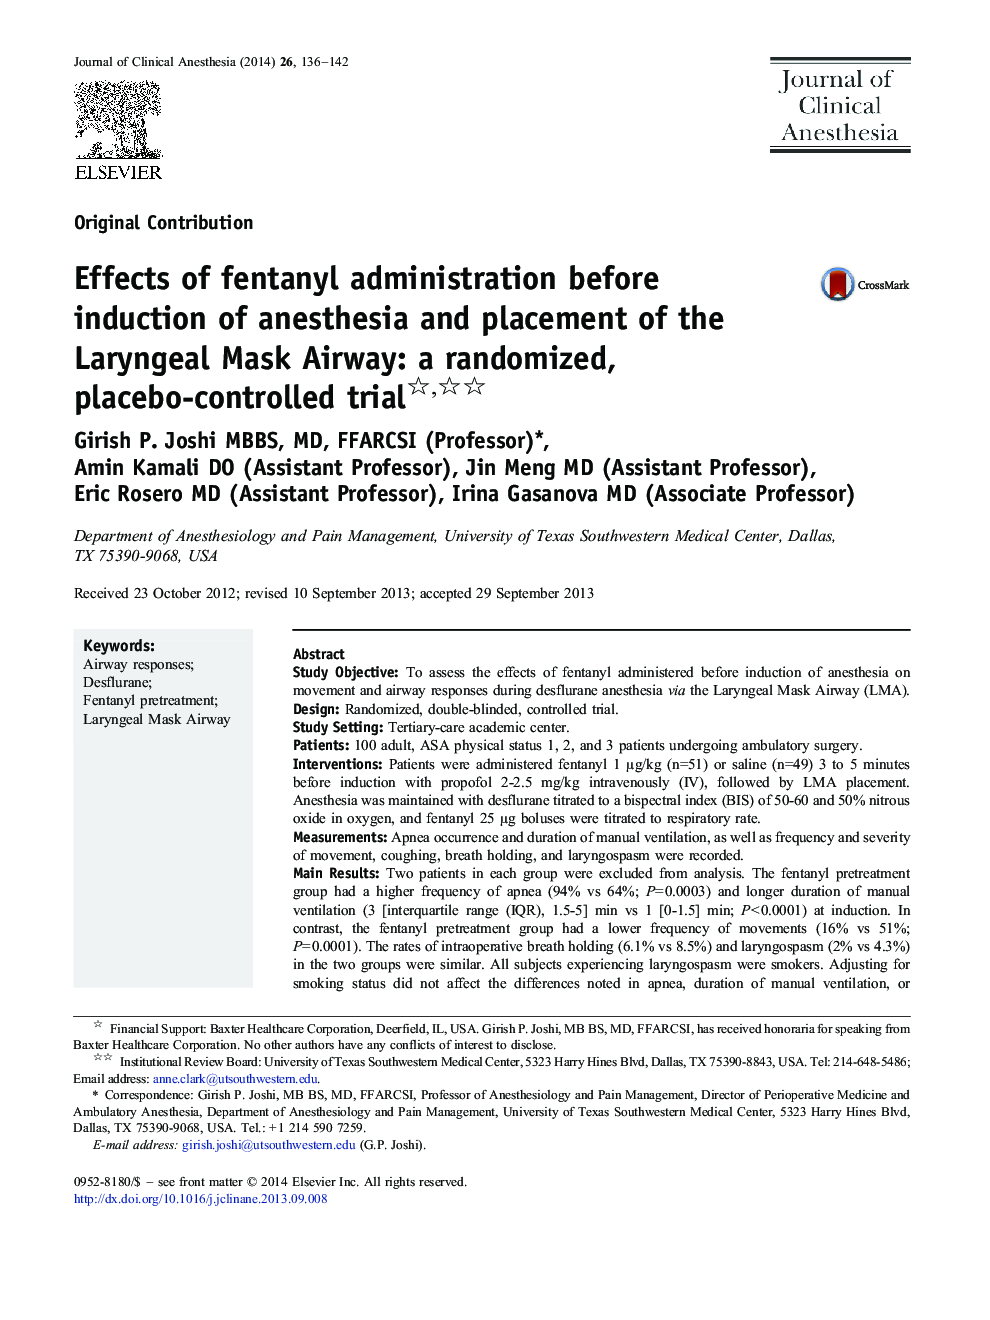 Effects of fentanyl administration before induction of anesthesia and placement of the Laryngeal Mask Airway: a randomized, placebo-controlled trial 